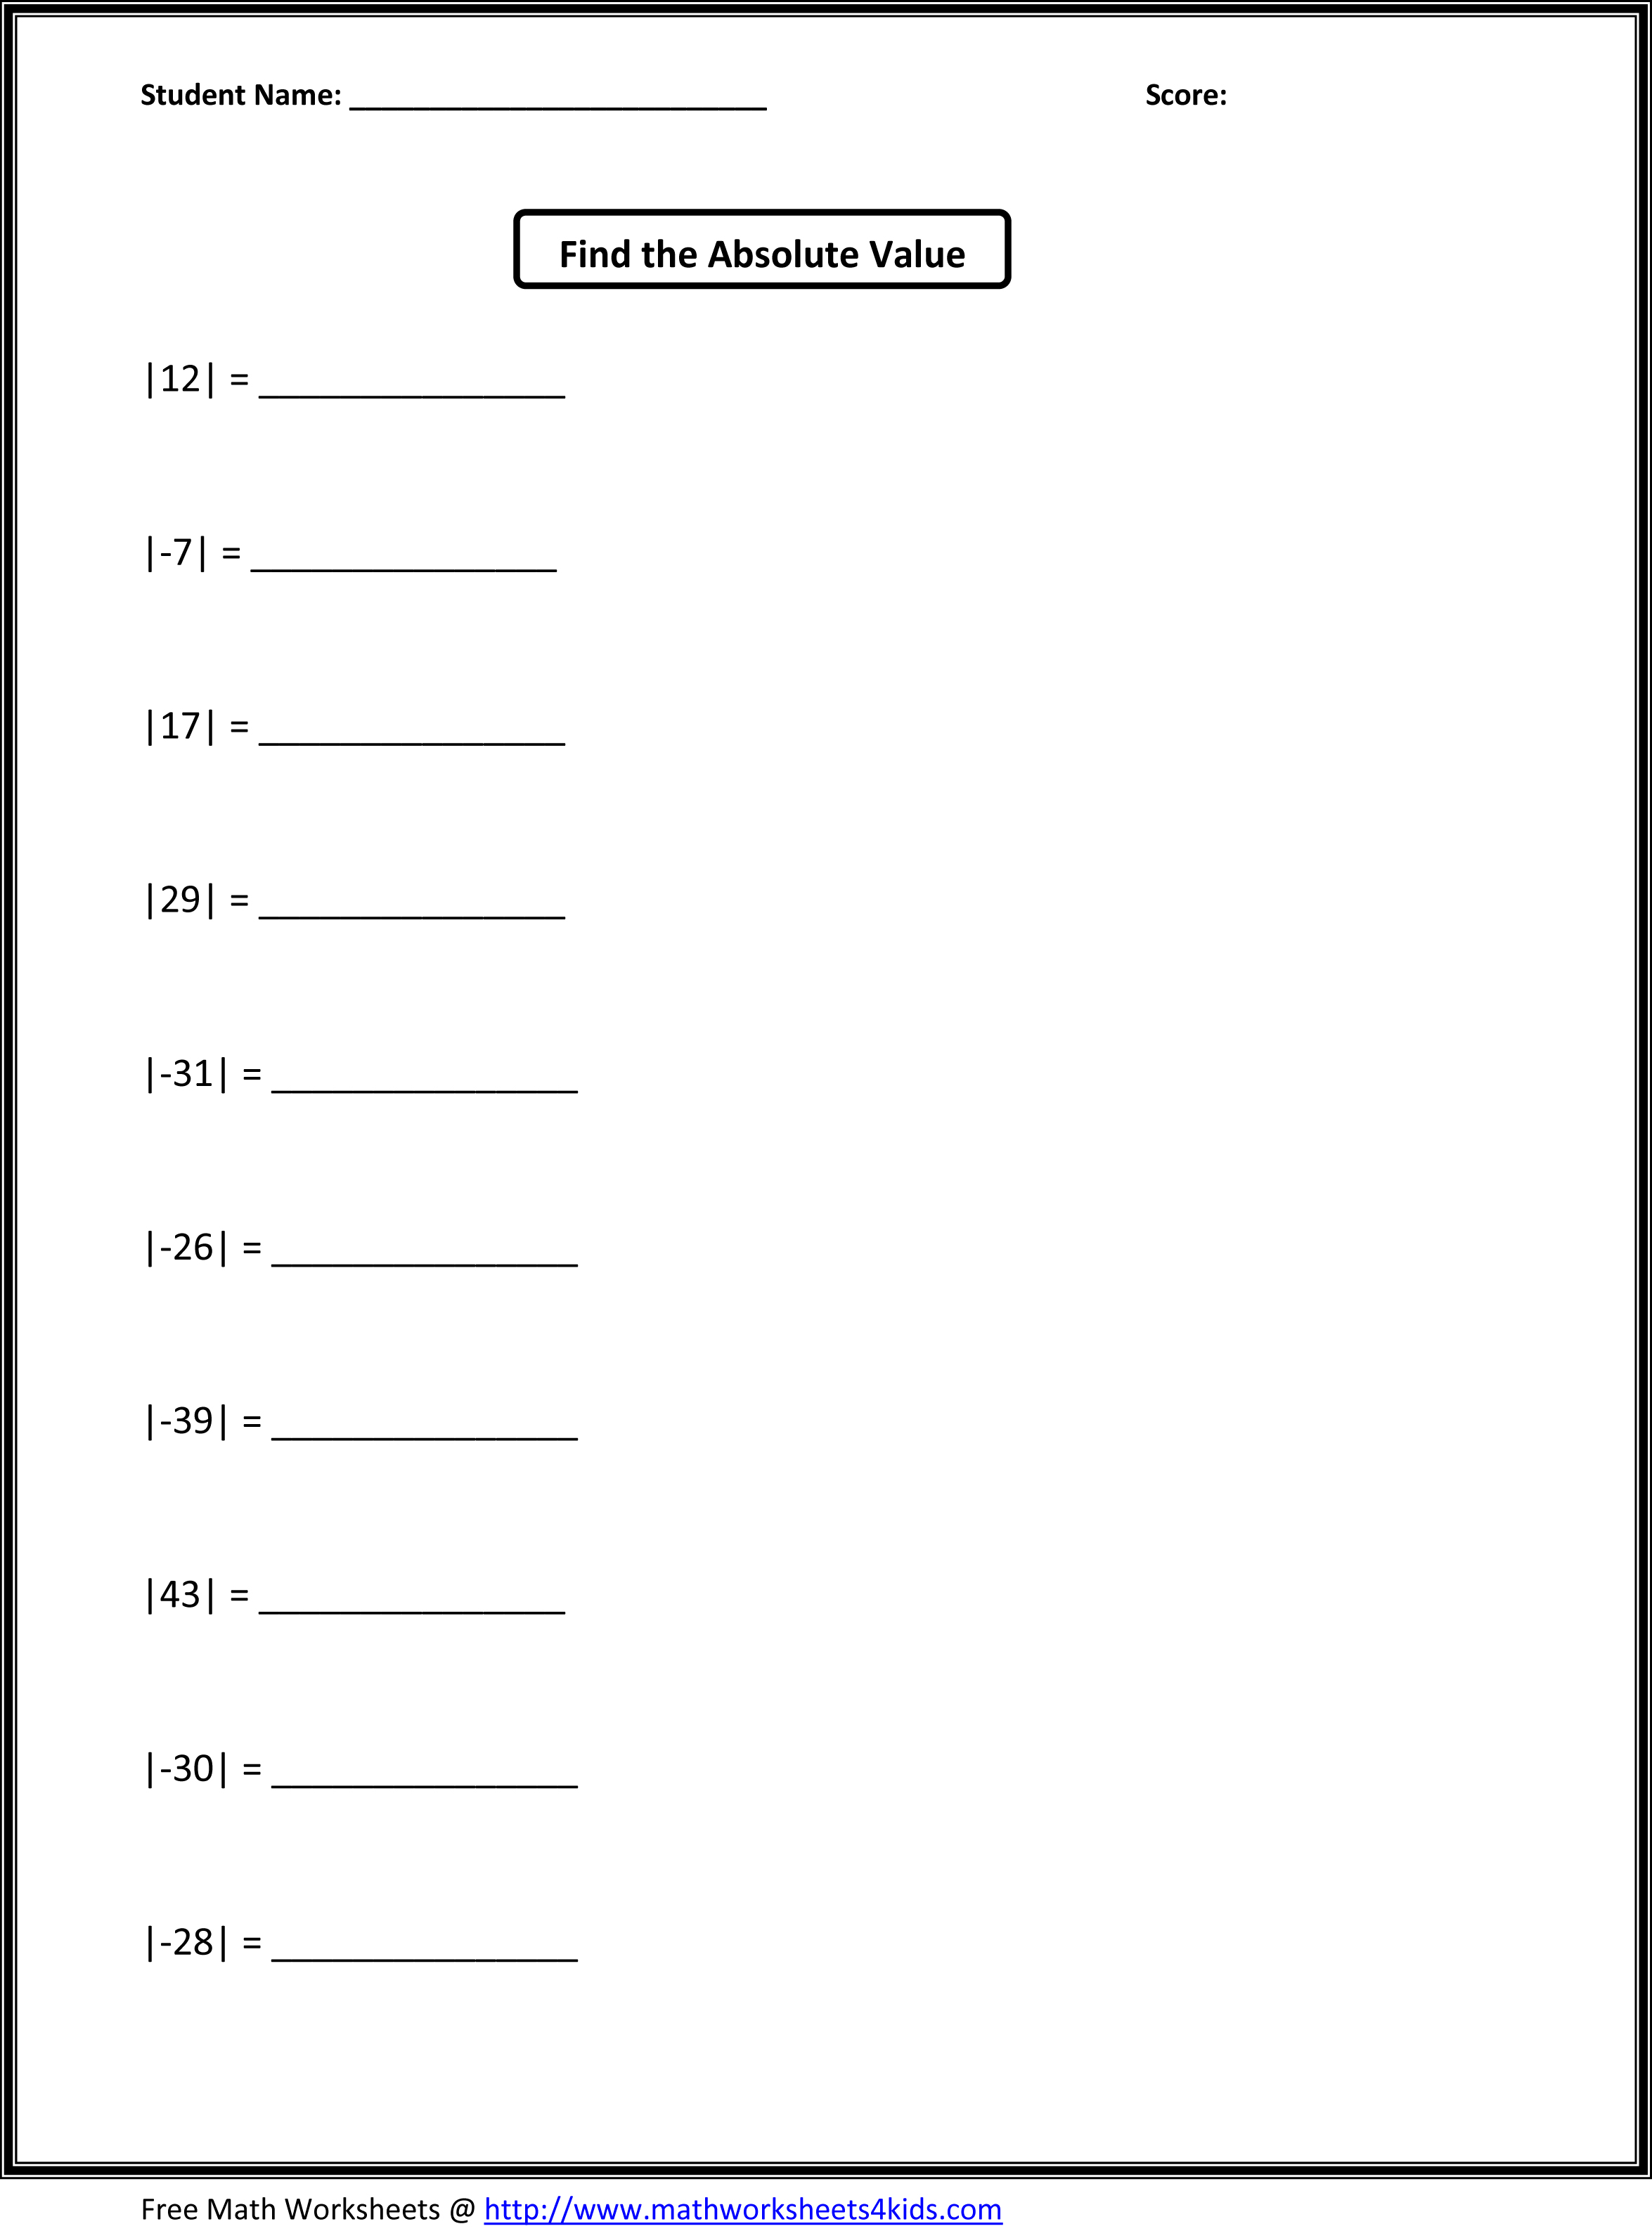 15-best-images-of-gcf-worksheets-with-answers-greatest-common-factor-6th-grade-math-worksheet